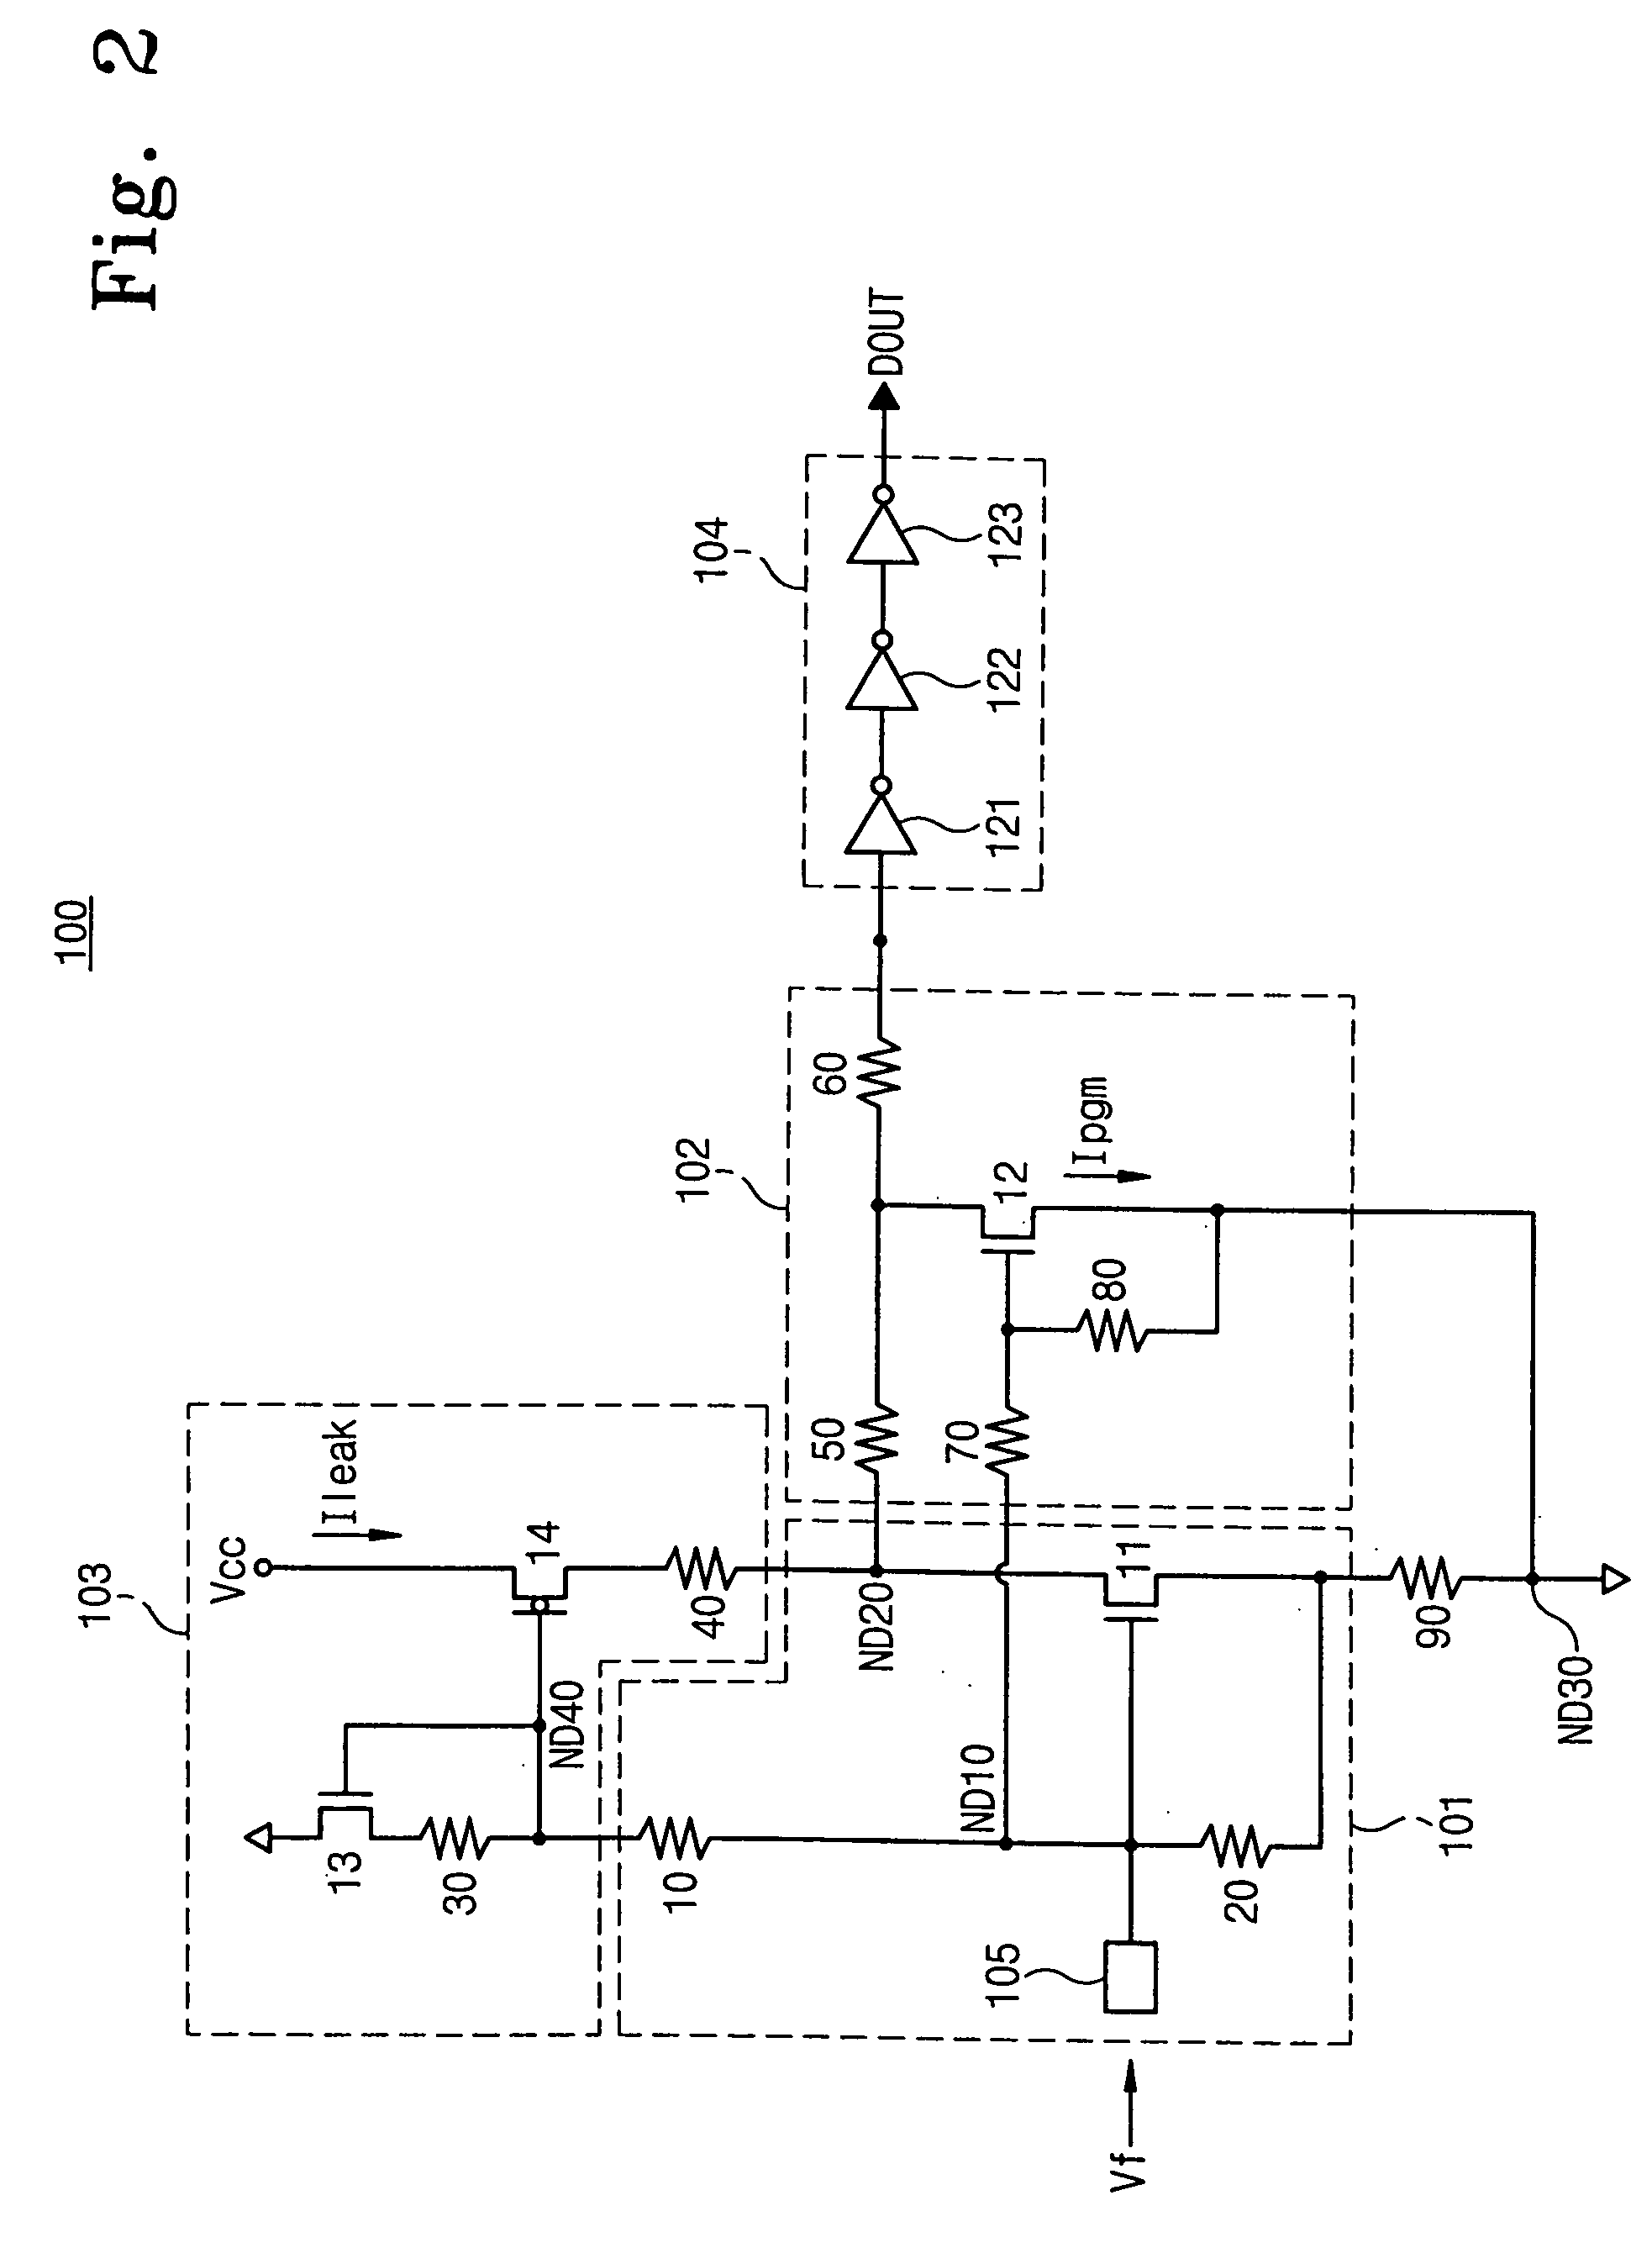 E-fuse circuit using leakage current path of transistor